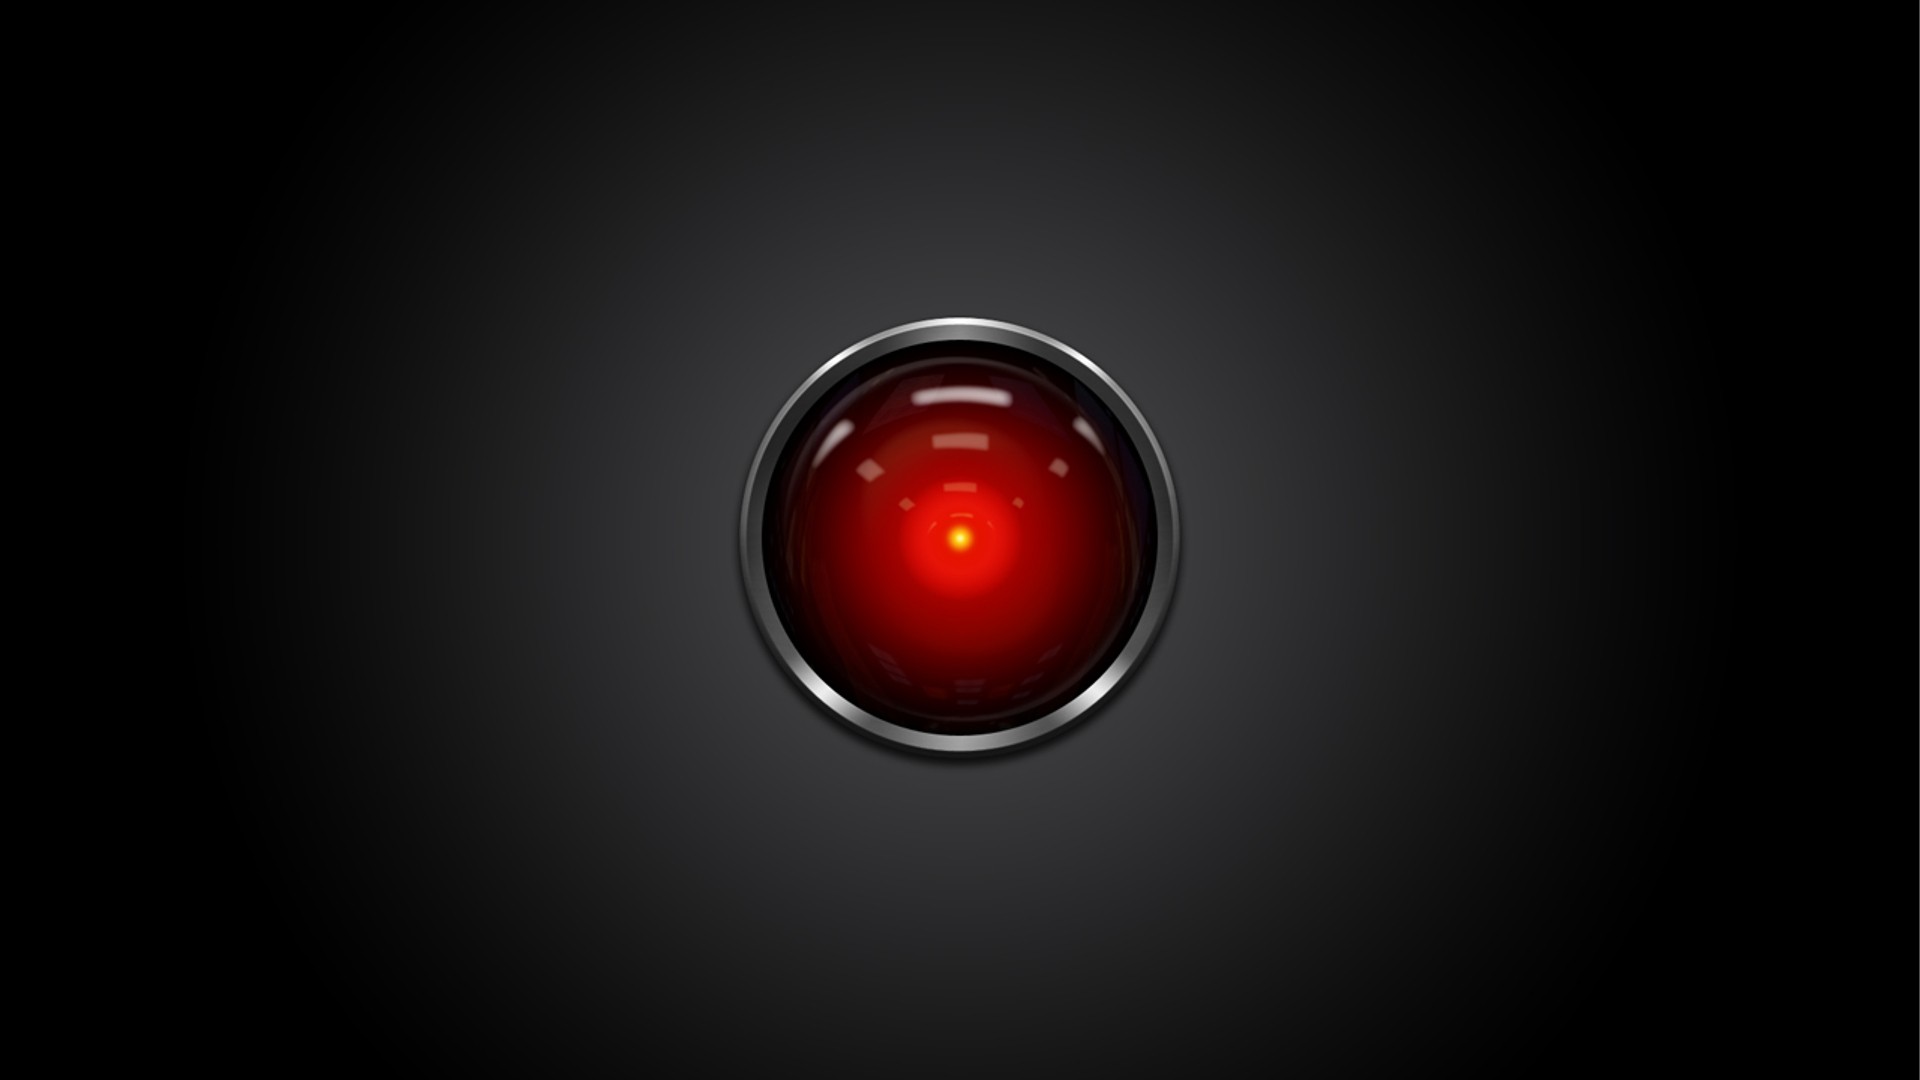 General 1920x1080 2001: A Space Odyssey HAL 9000 movies computer simple background science fiction